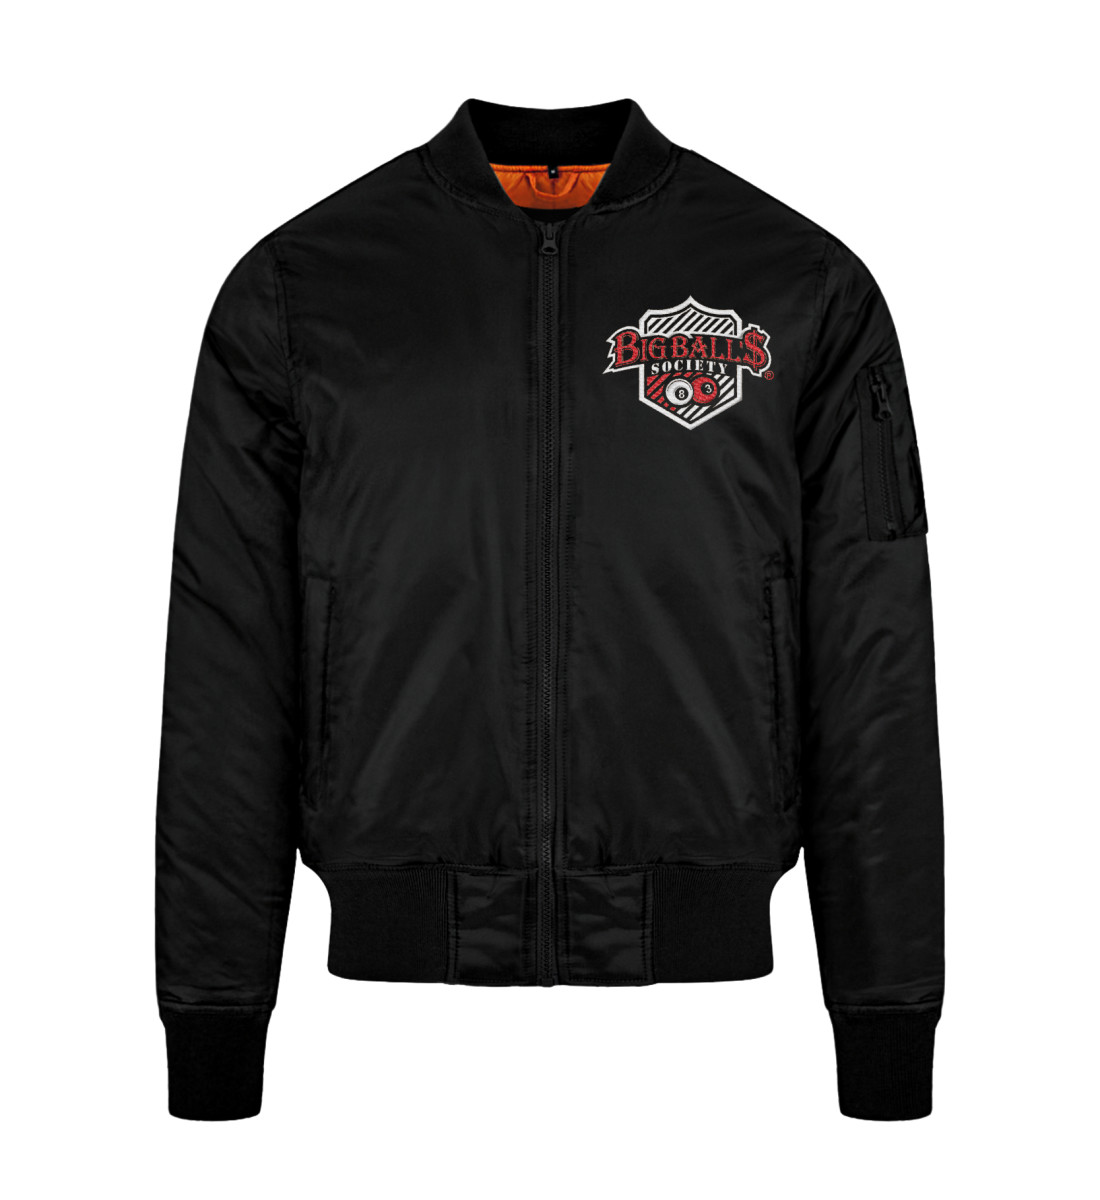 Big Ball'$ Society Premium Jackets Gestickt  - Unisex Bomber Jacket with Embroidery